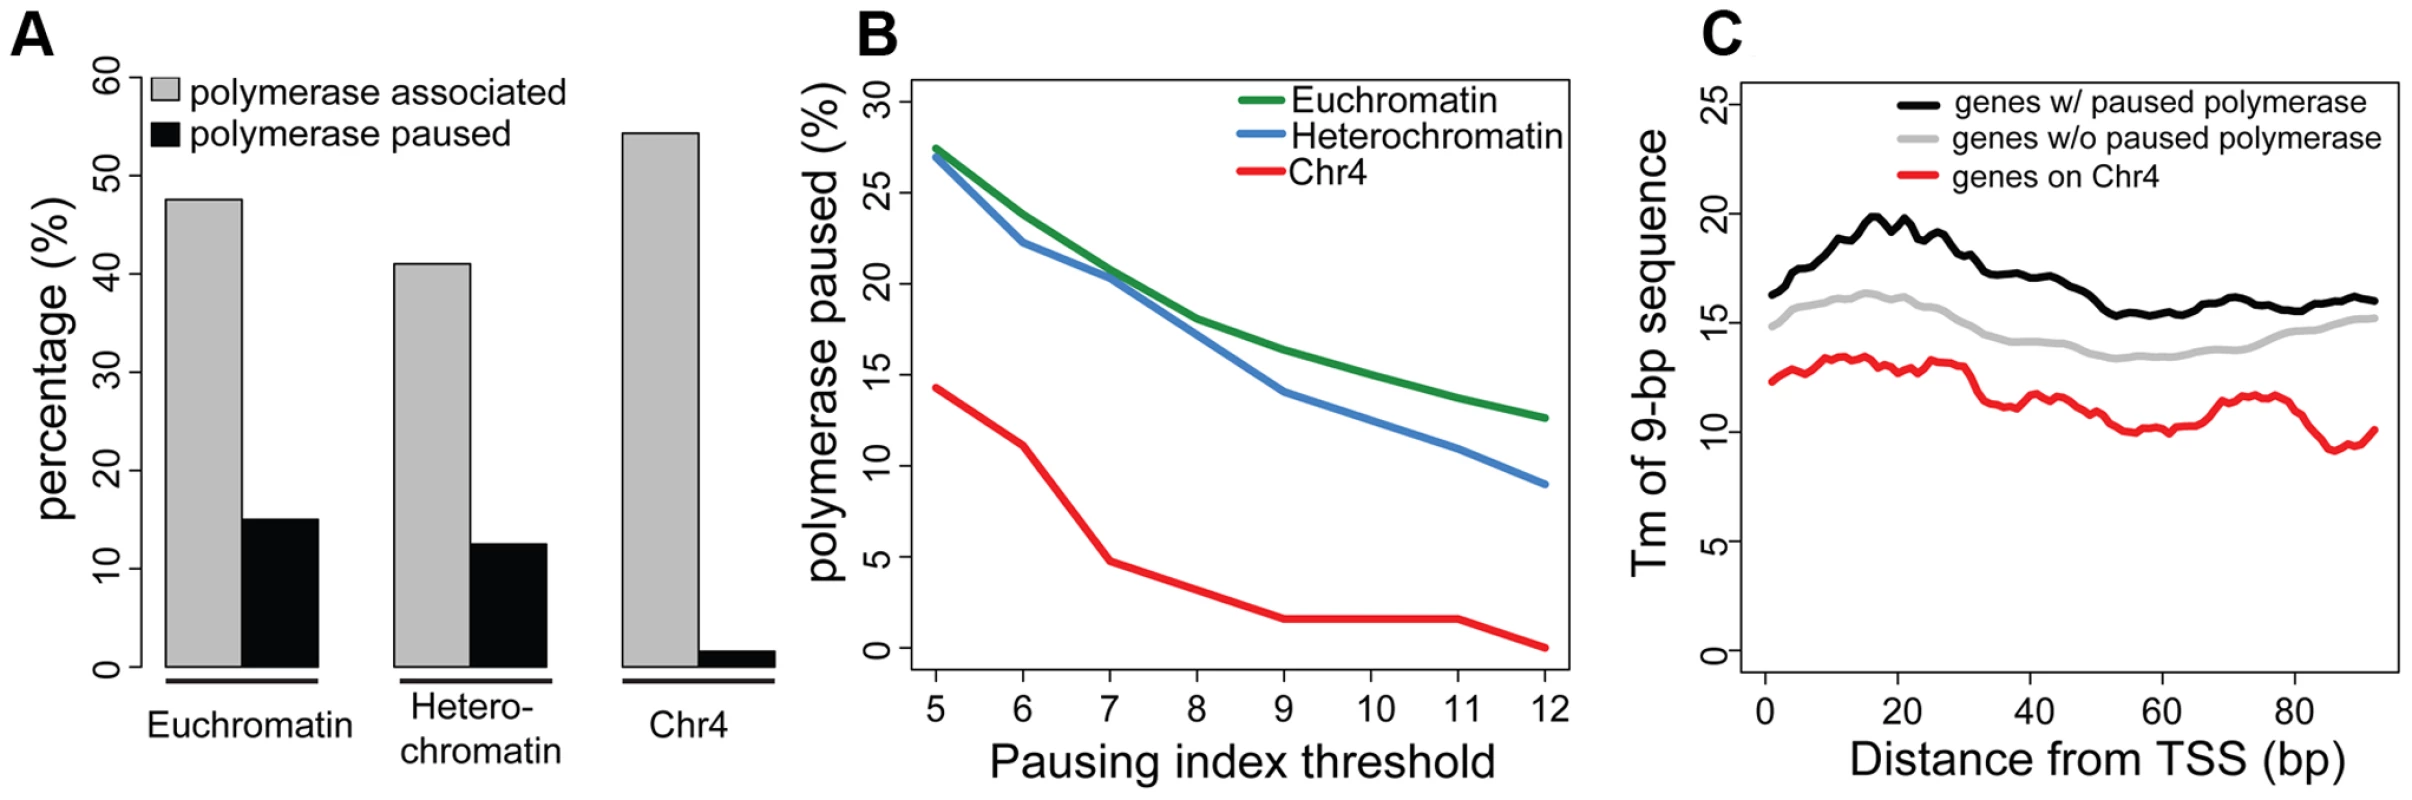 Chromosome 4 has a very low incidence of polymerase pausing identified by GRO-seq data.